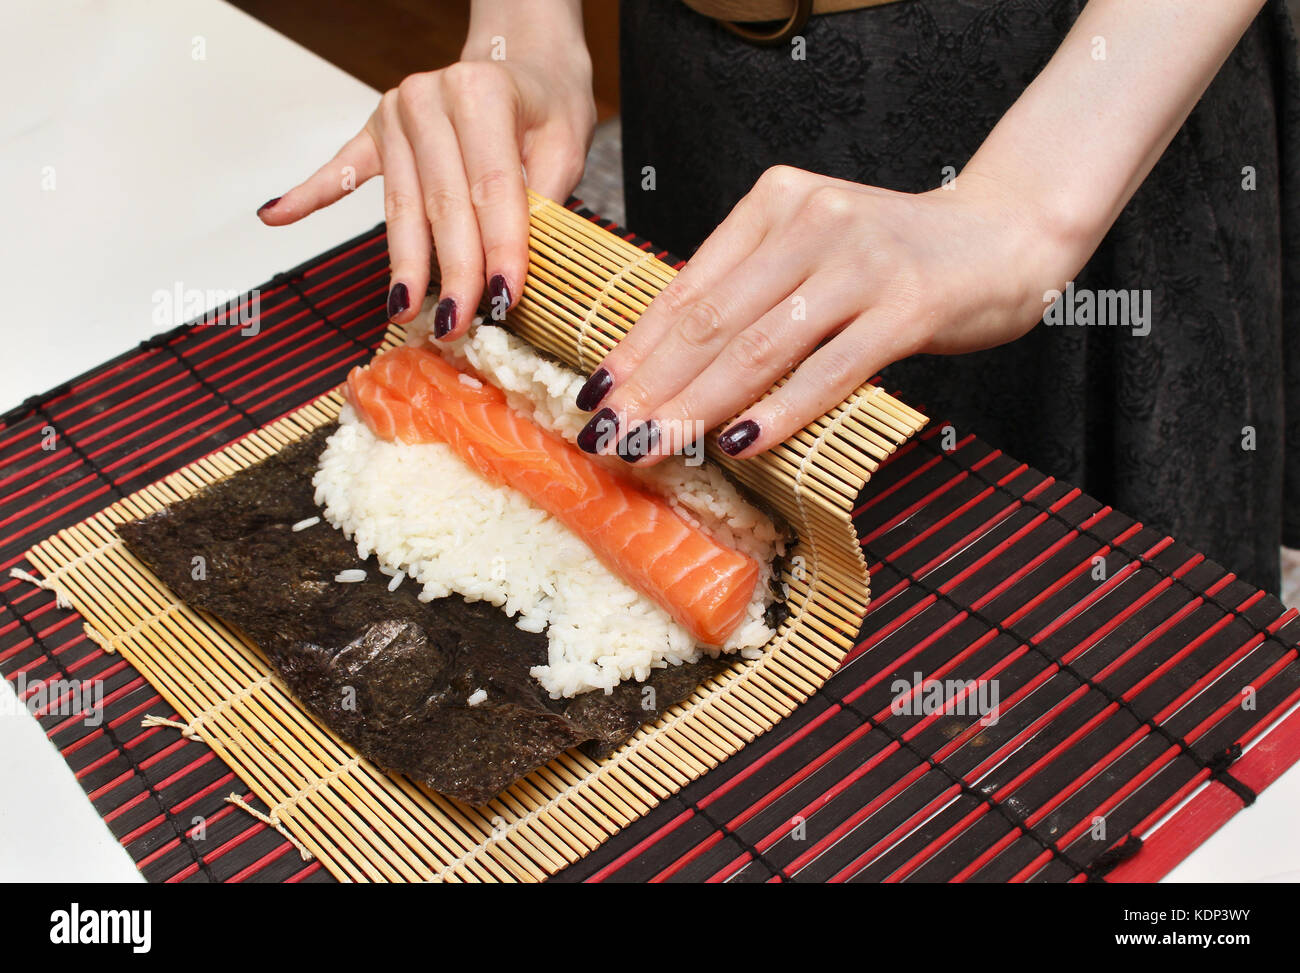 https://c8.alamy.com/comp/KDP3WY/woman-using-bamboo-rolling-mat-for-home-made-sushi-KDP3WY.jpg